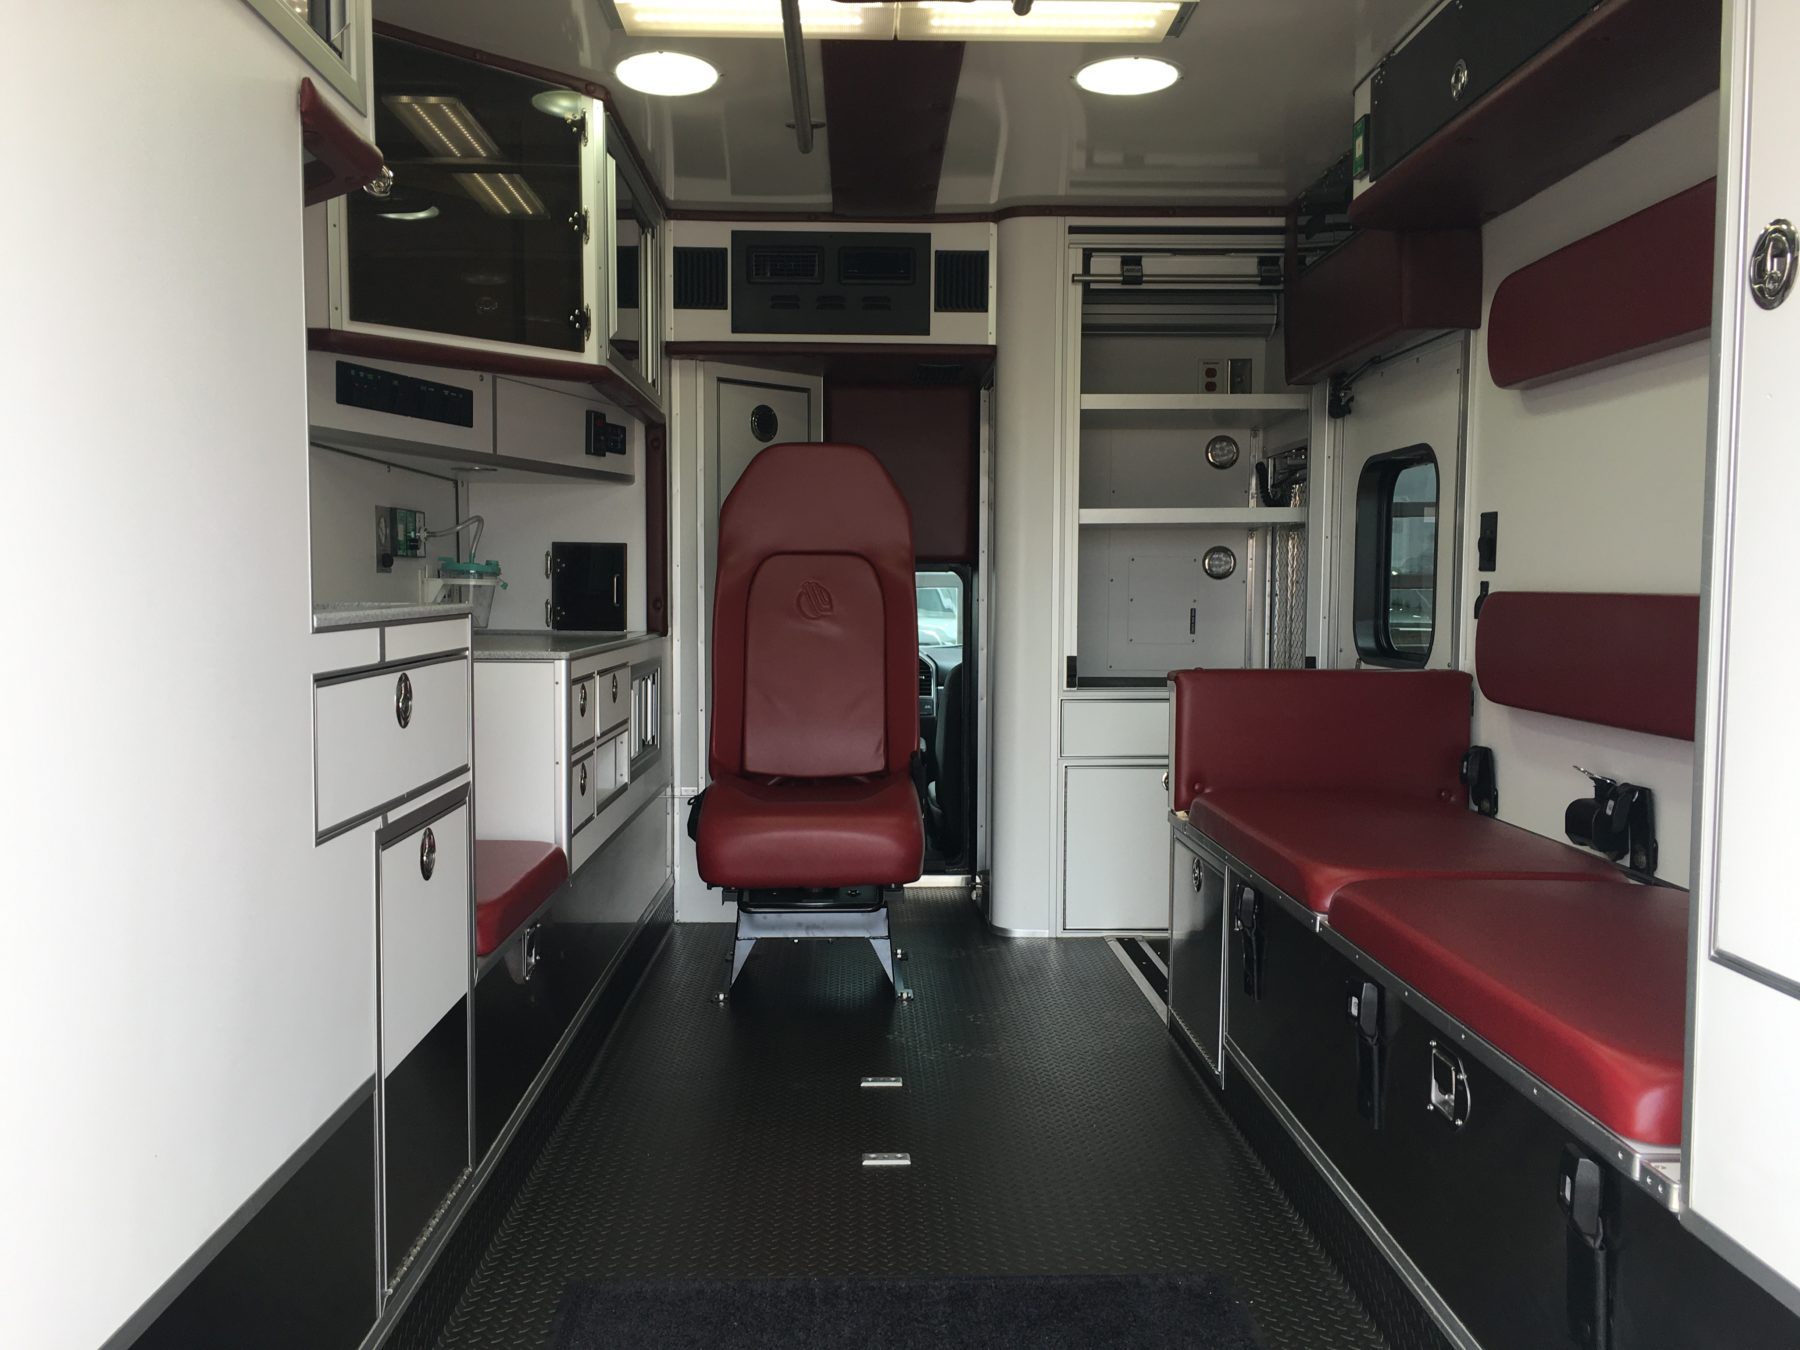 2020 Ford F450 4x4 Heavy Duty Ambulance For Sale – Picture 2